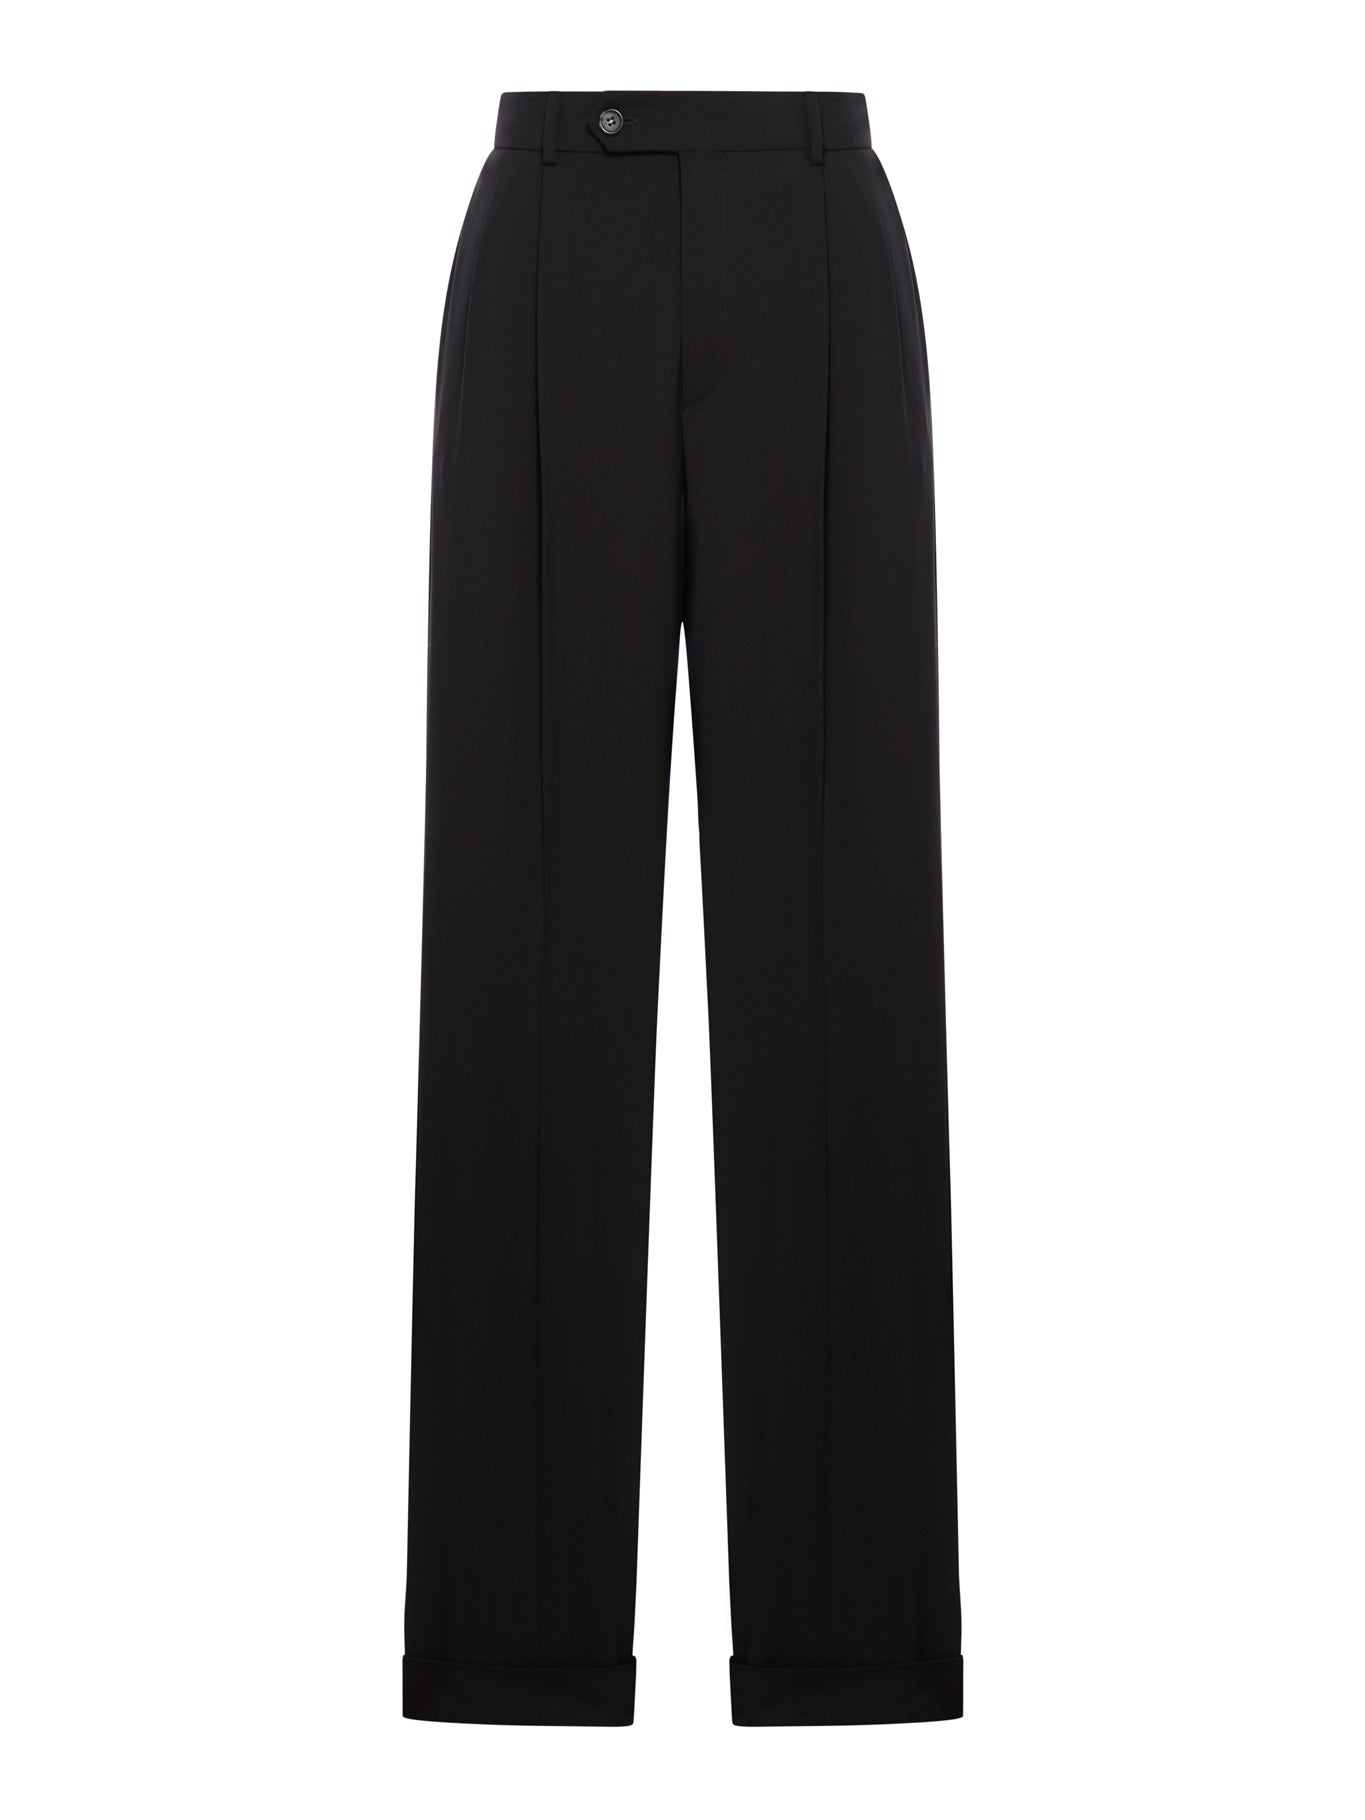 wounded wool trousers